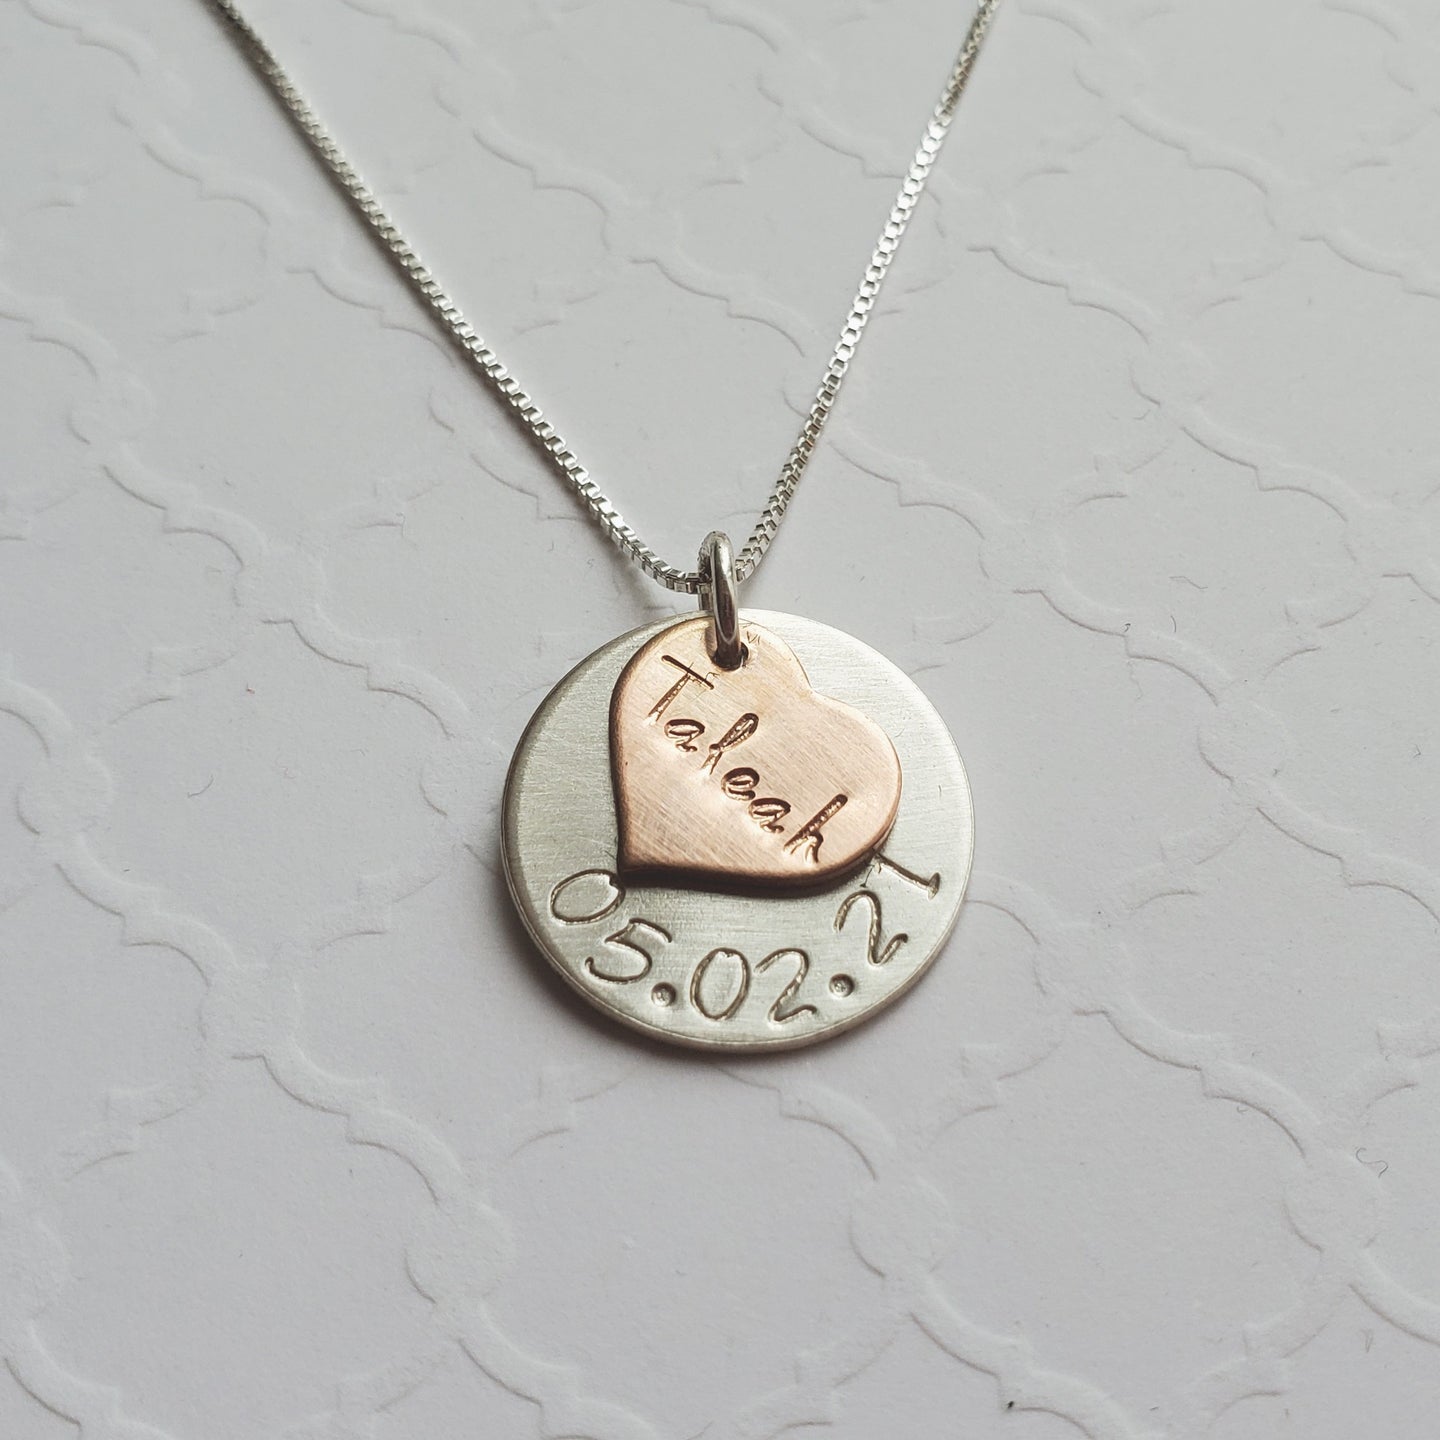 custom mom necklace with rose gold baby's name heart and sterling birthdate disc